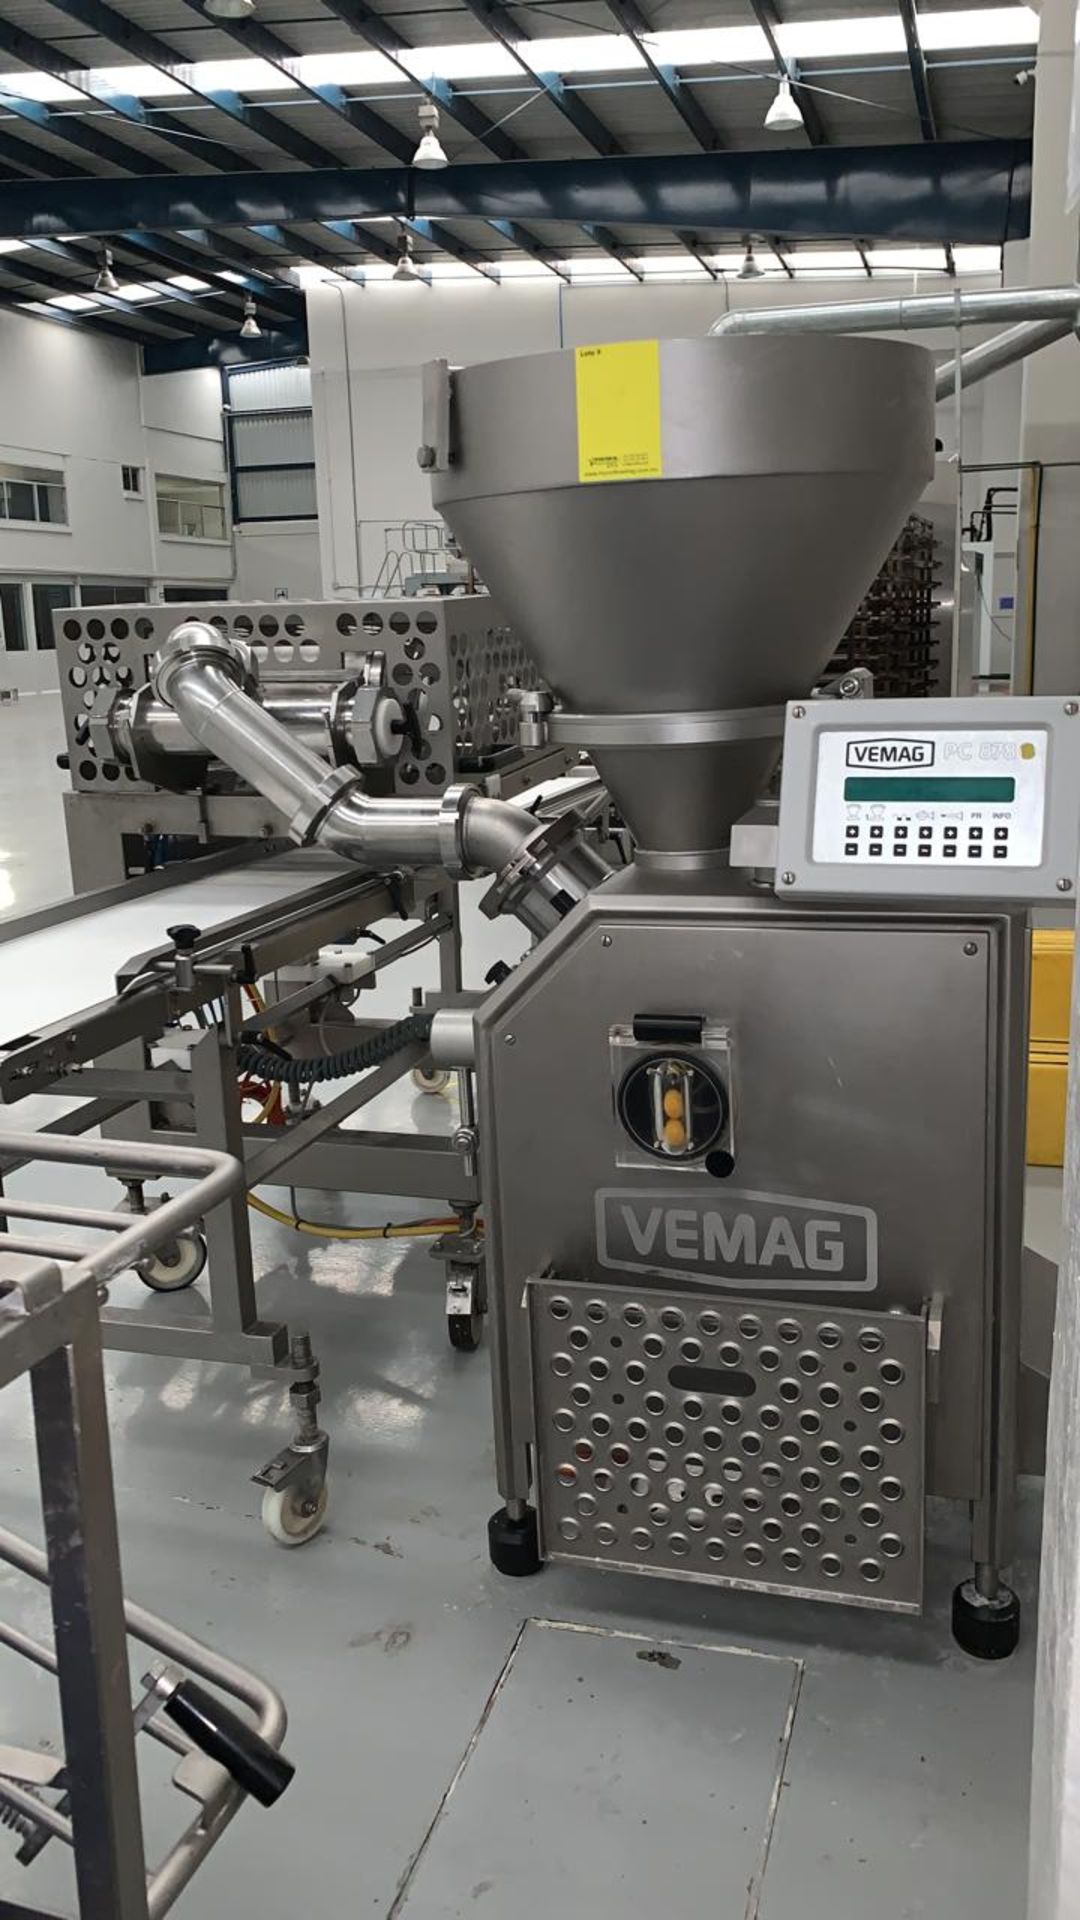 Vemag Robot 500 Pneumatic Dispenser SN 1284993, with PLC Model PC878 - Image 20 of 37